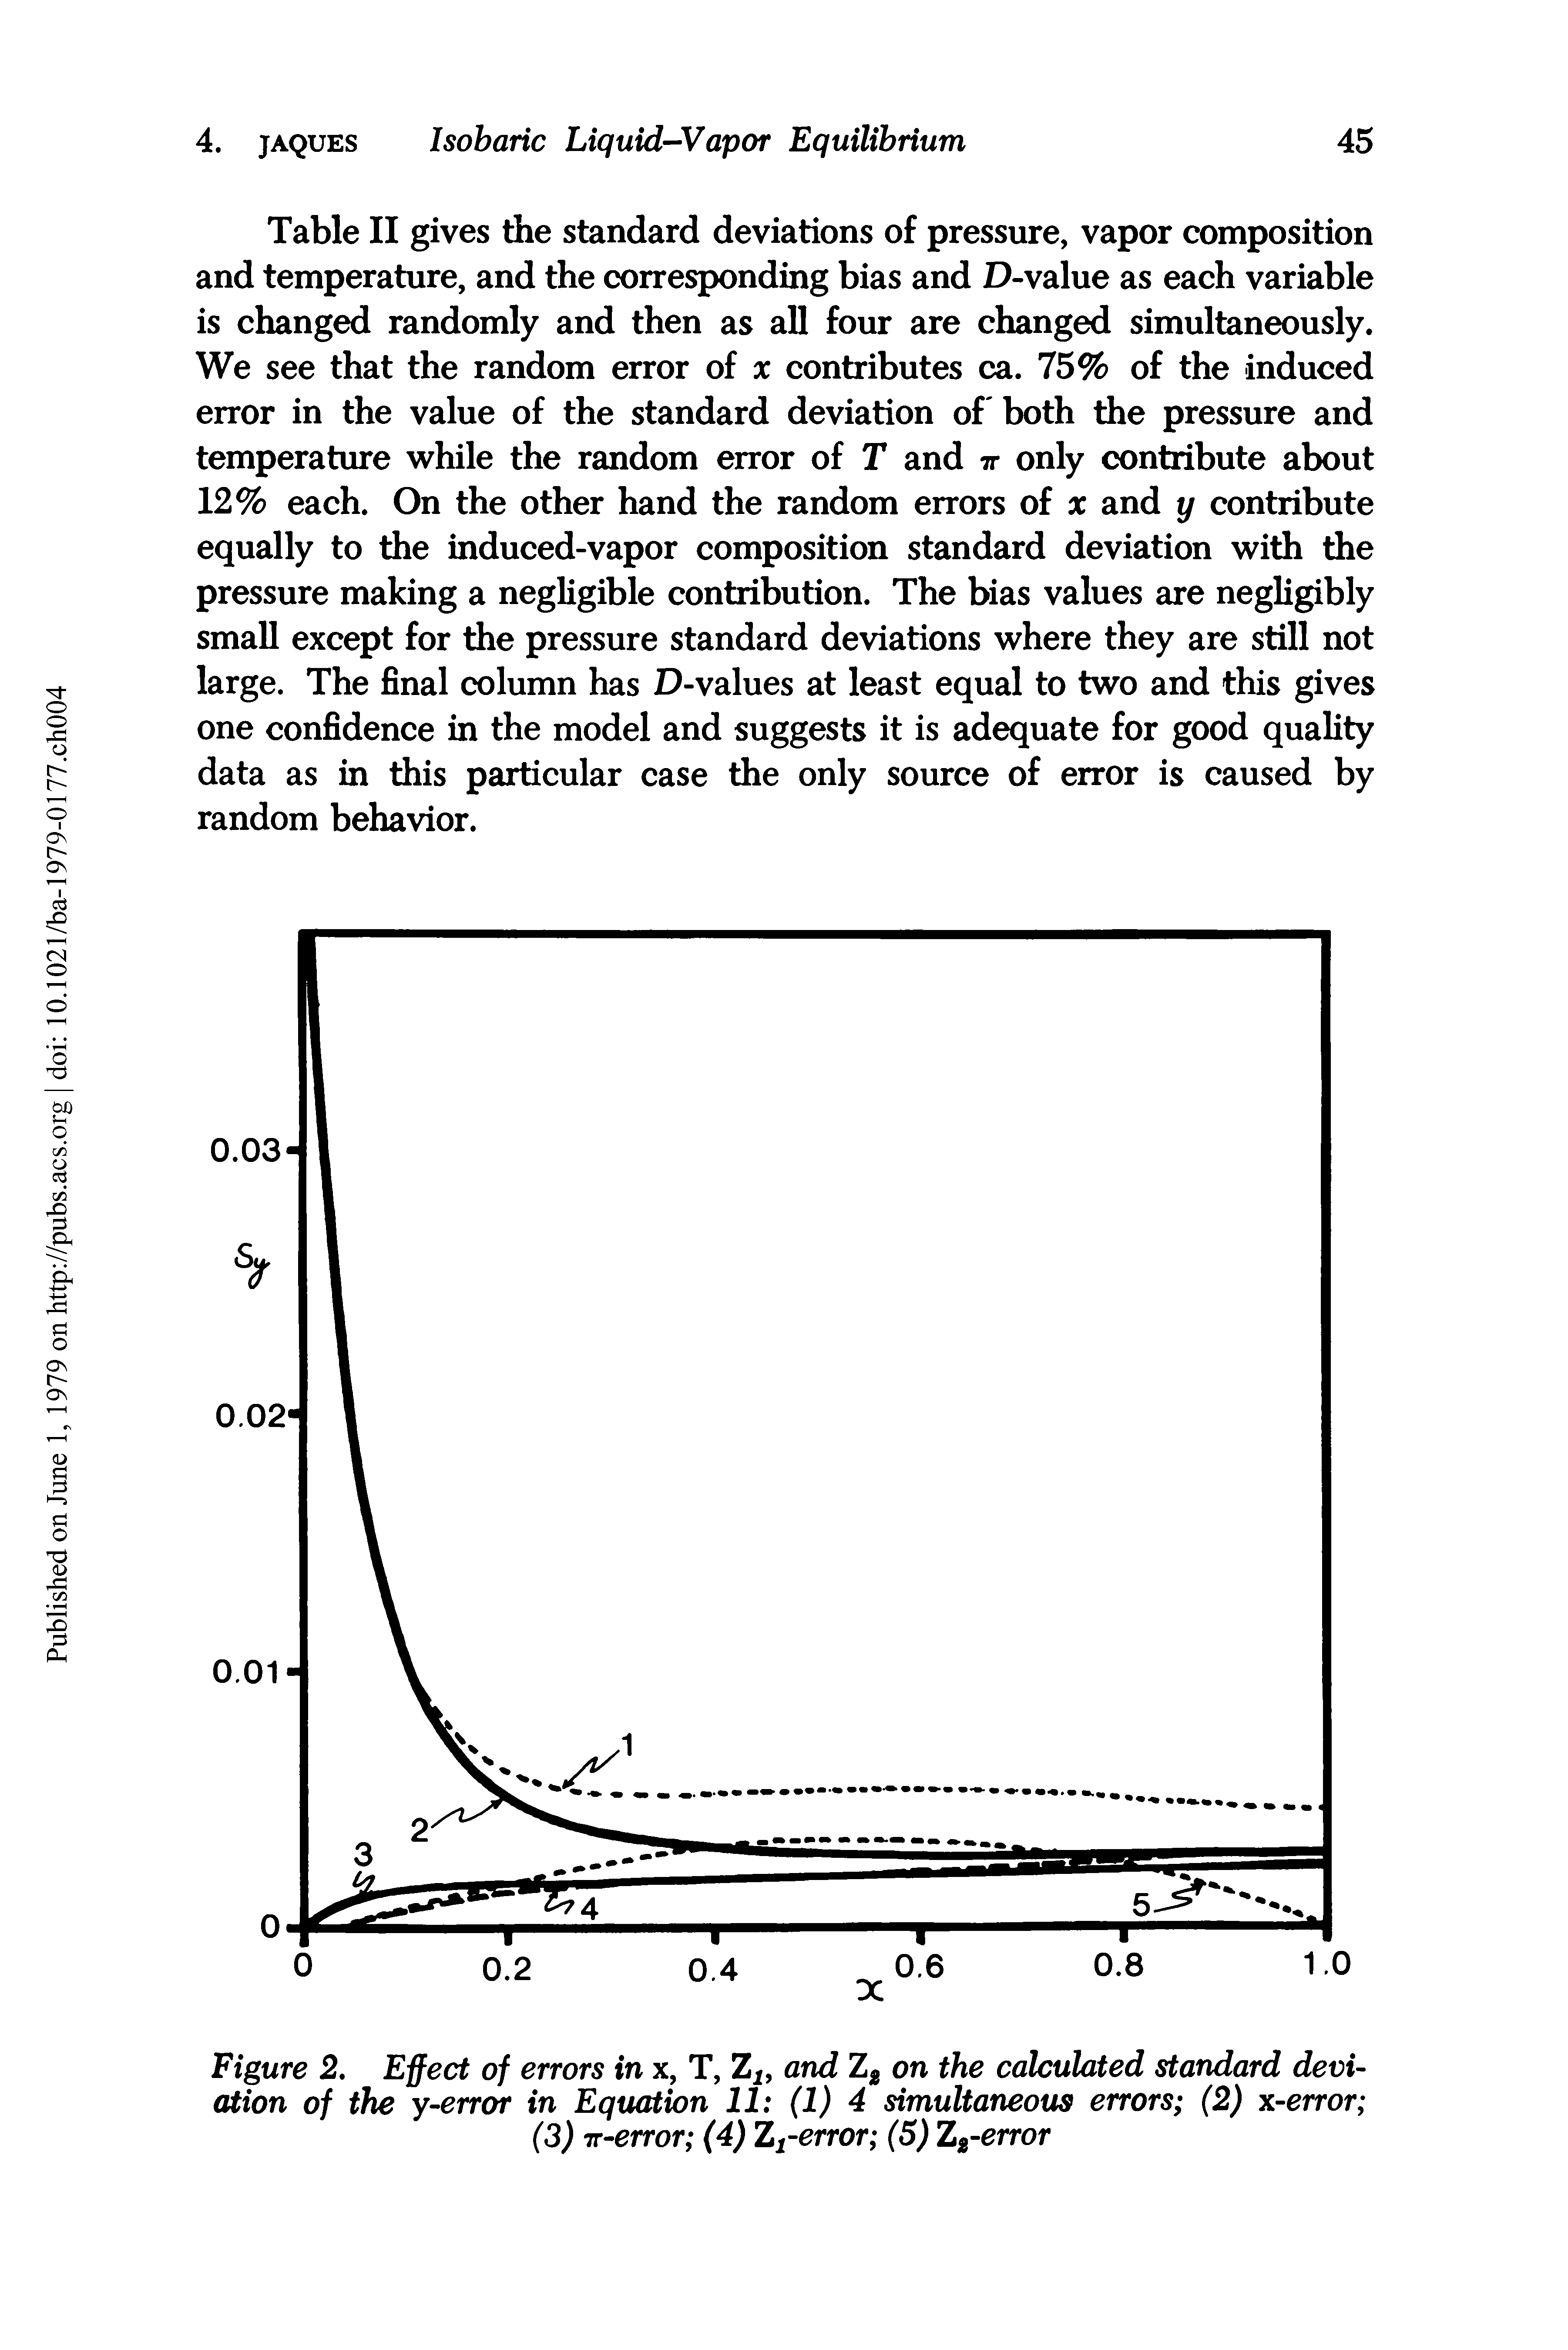 Table II gives the standard deviations of pressure, vapor composition and temperature, and the corresponding bias and D-value as each variable is changed randomly and then as all four are changed simultaneously. We see that the random error of x contributes ca. 75% of the induced error in the value of the standard deviation of both the pressure and temperature while the random error of T and tt only contribute about 12% each. On the other hand the random errors of x and y contribute equally to the induced-vapor composition standard deviation with the pressure making a negligible contribution. The bias values are negligibly small except for the pressure standard deviations where they are still not large. The final column has D-values at least equal to two and this gives one confidence in the model and suggests it is adequate for good quality data as in this particular case the only source of error is caused by random behavior.